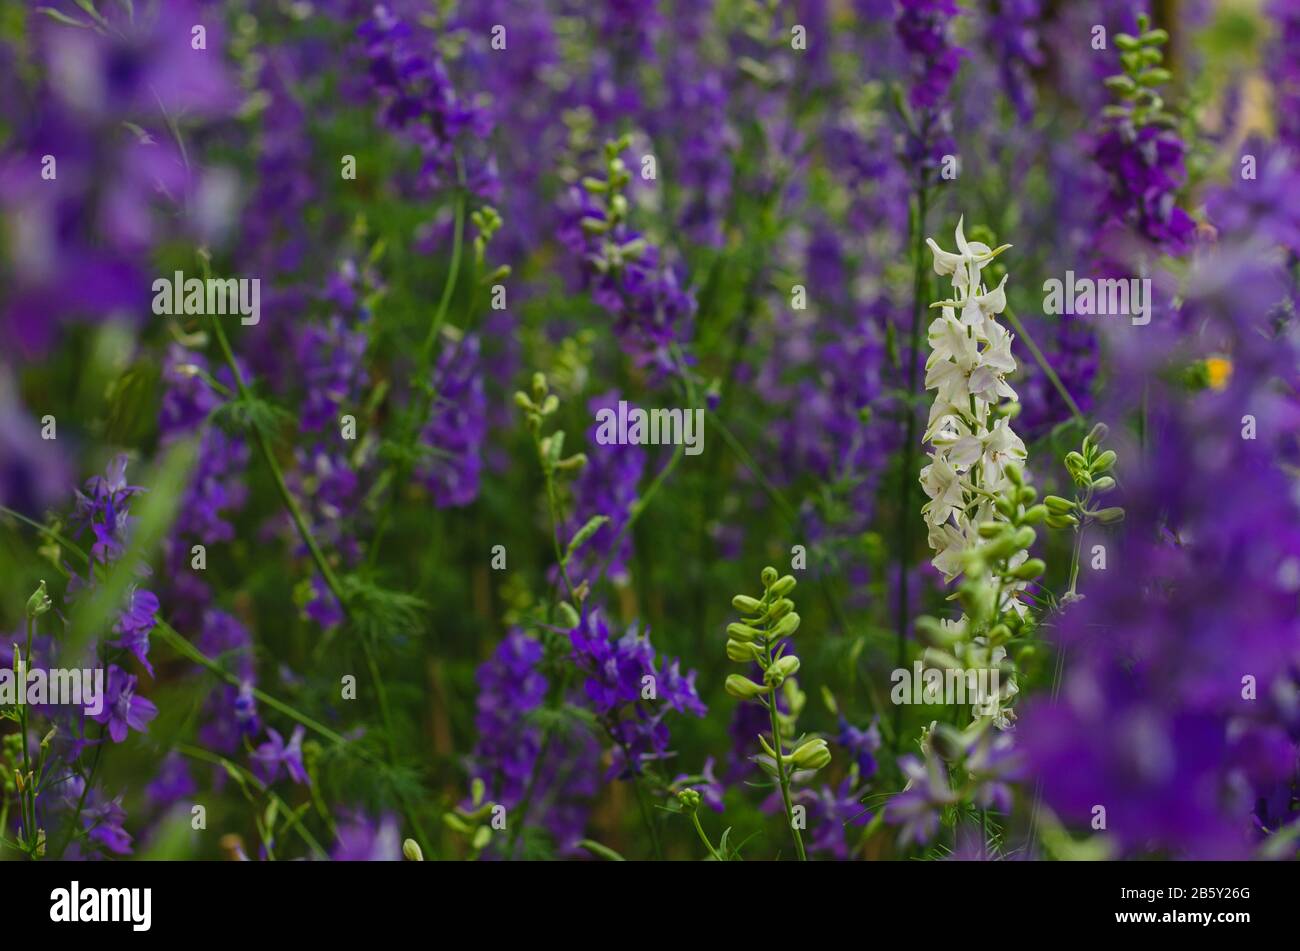 White Consolida regalis flower stand out among purple color of them for spring season concept. Stock Photo